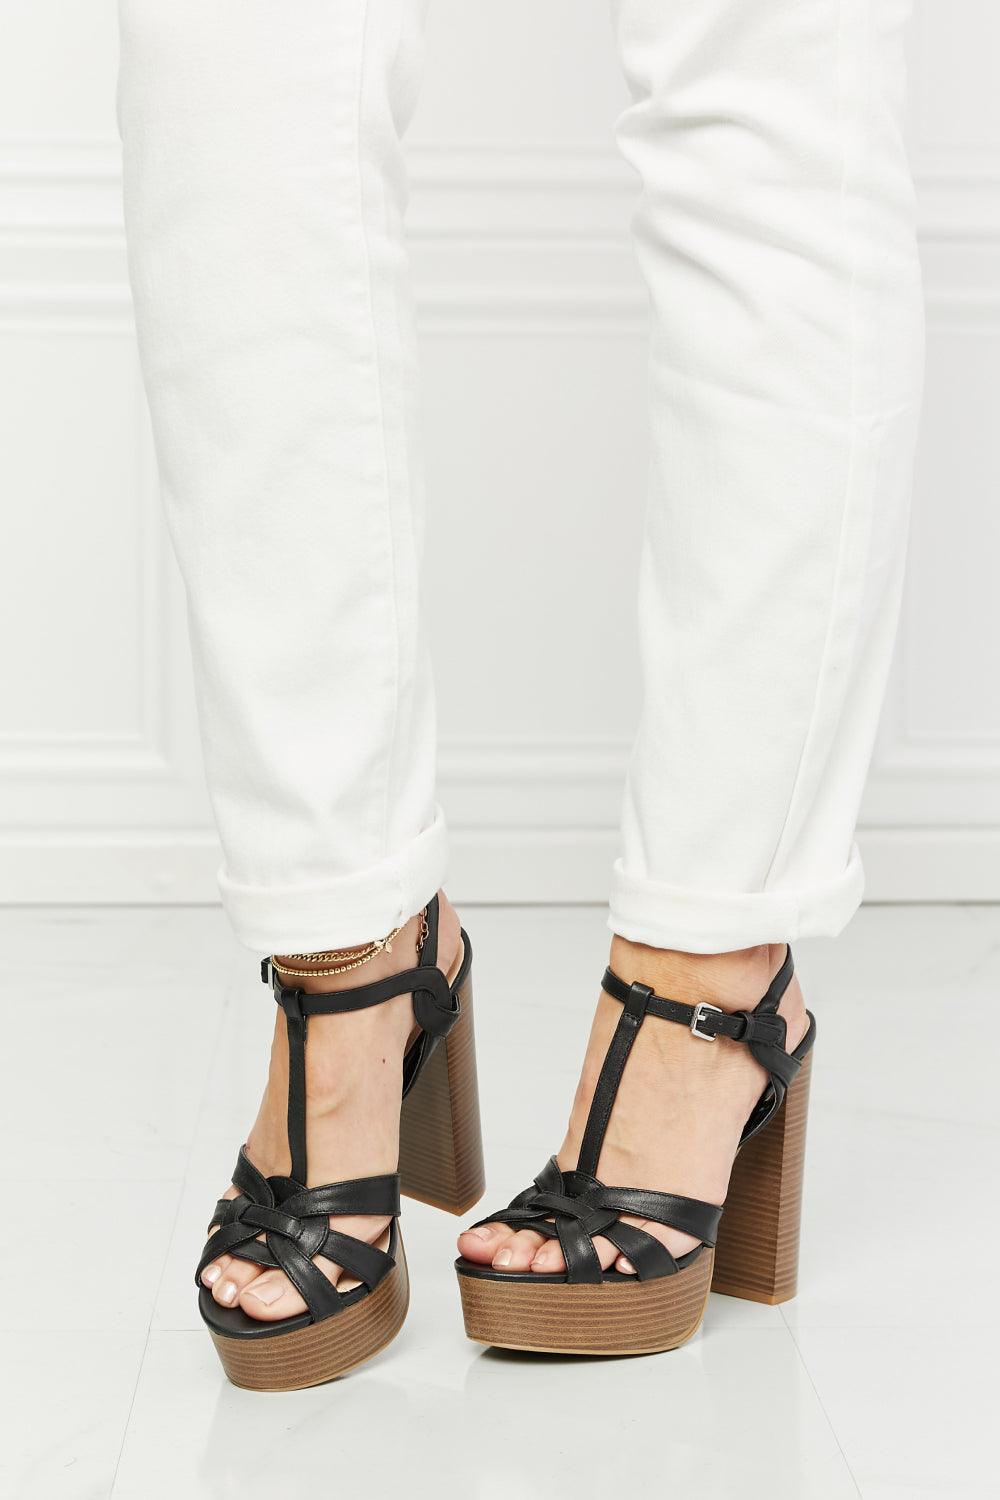 Legend She's Classy Strappy Heels - CADEAUME